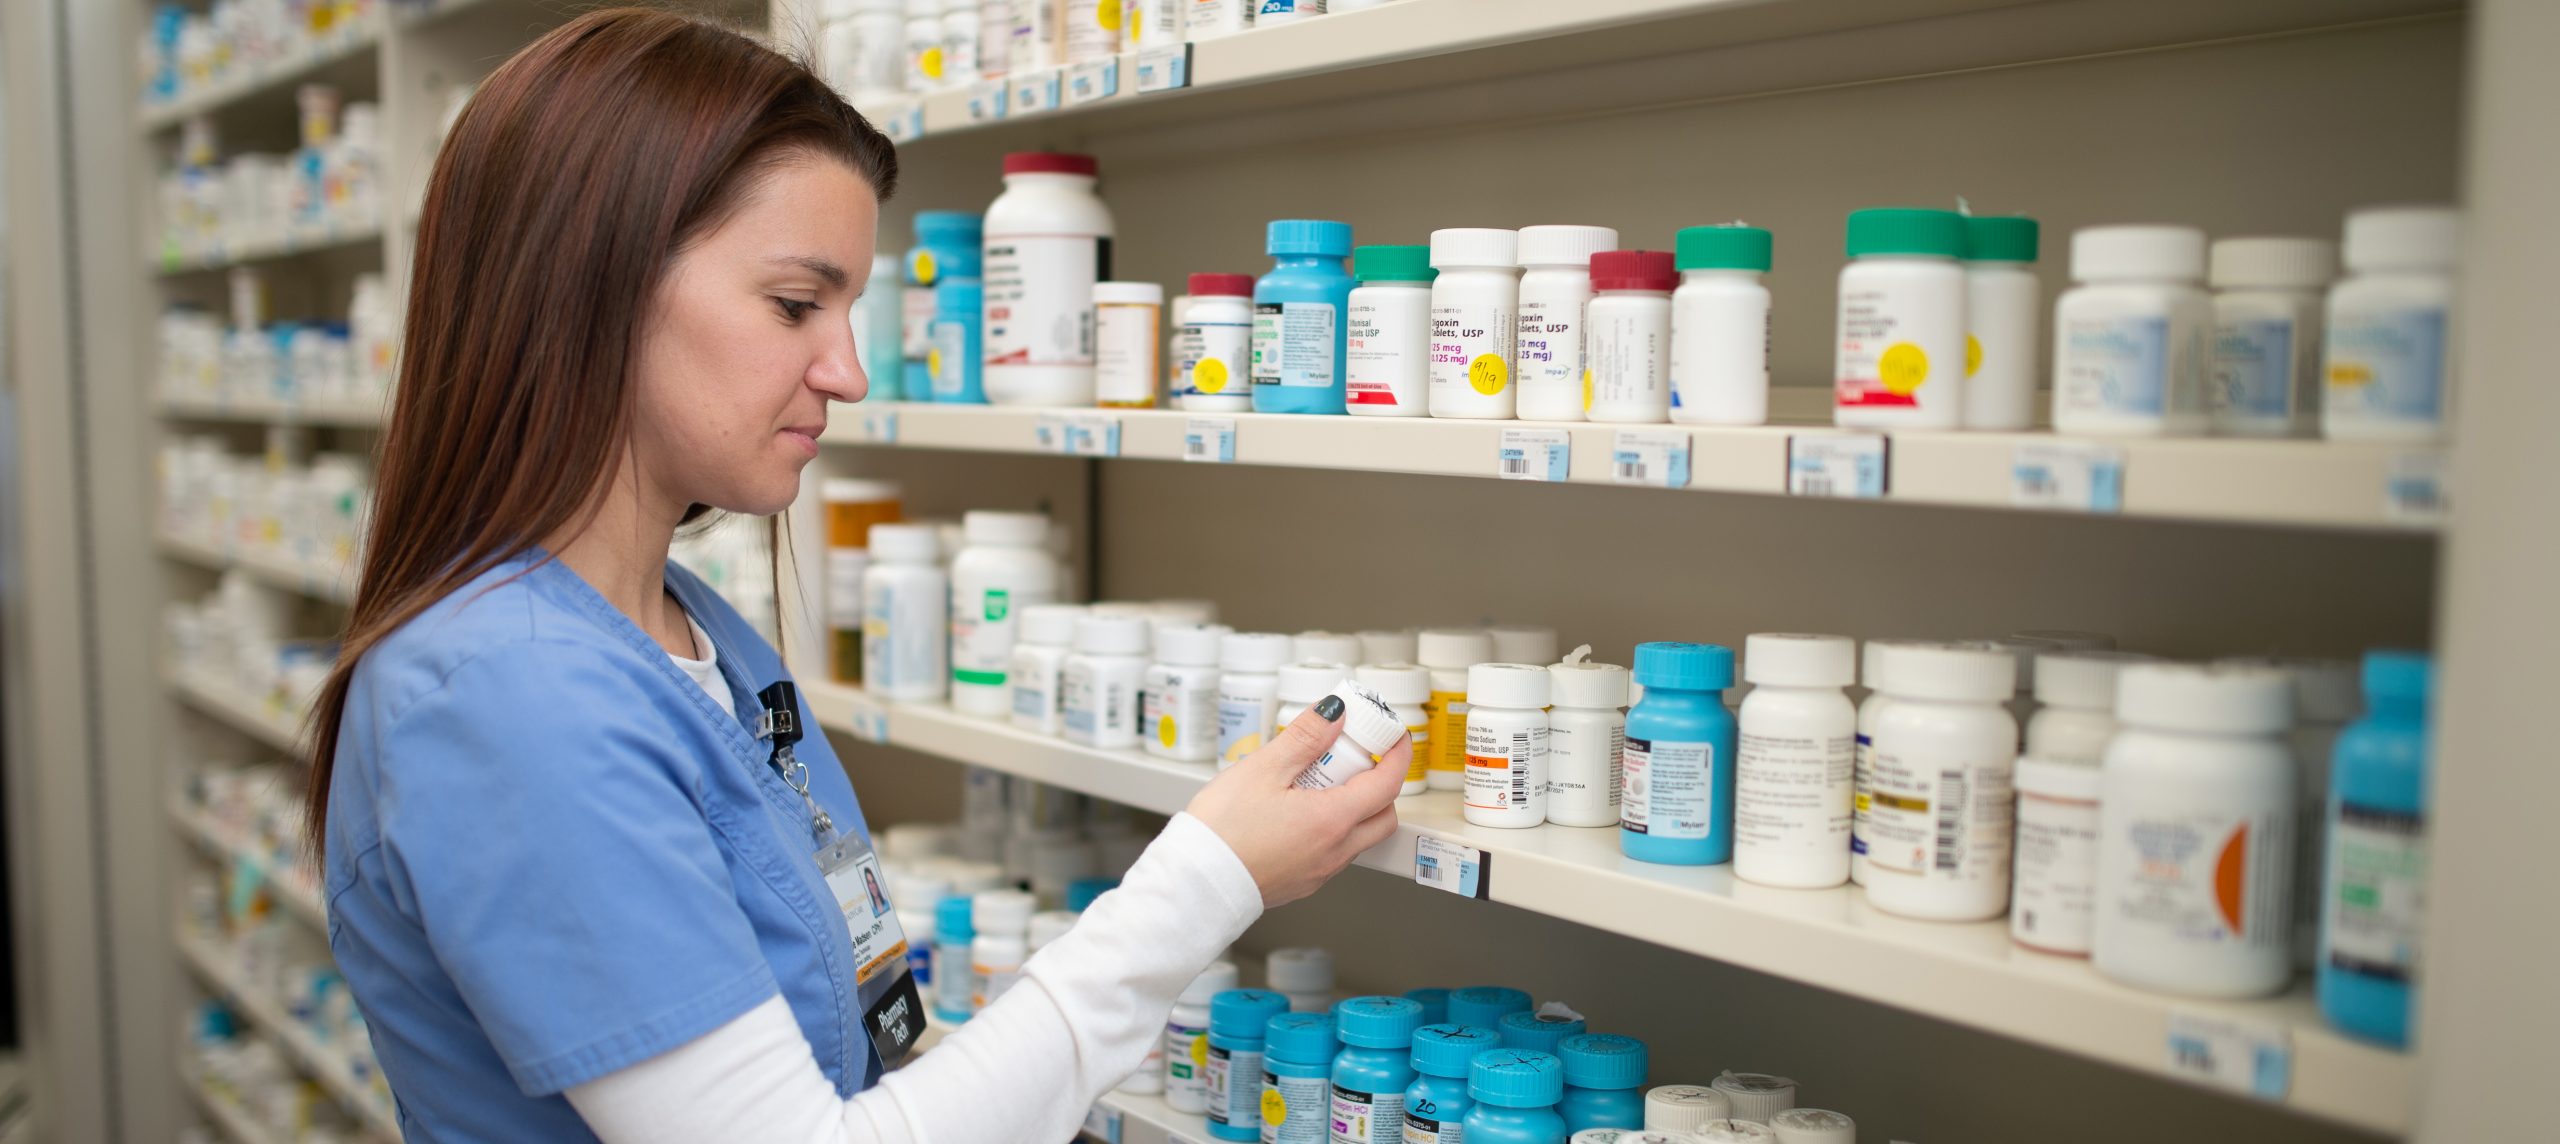 Online Jobs With No Experience, Remote Jobs From Home No Experience In US @ Click To Know More (Pharmacy Technician)